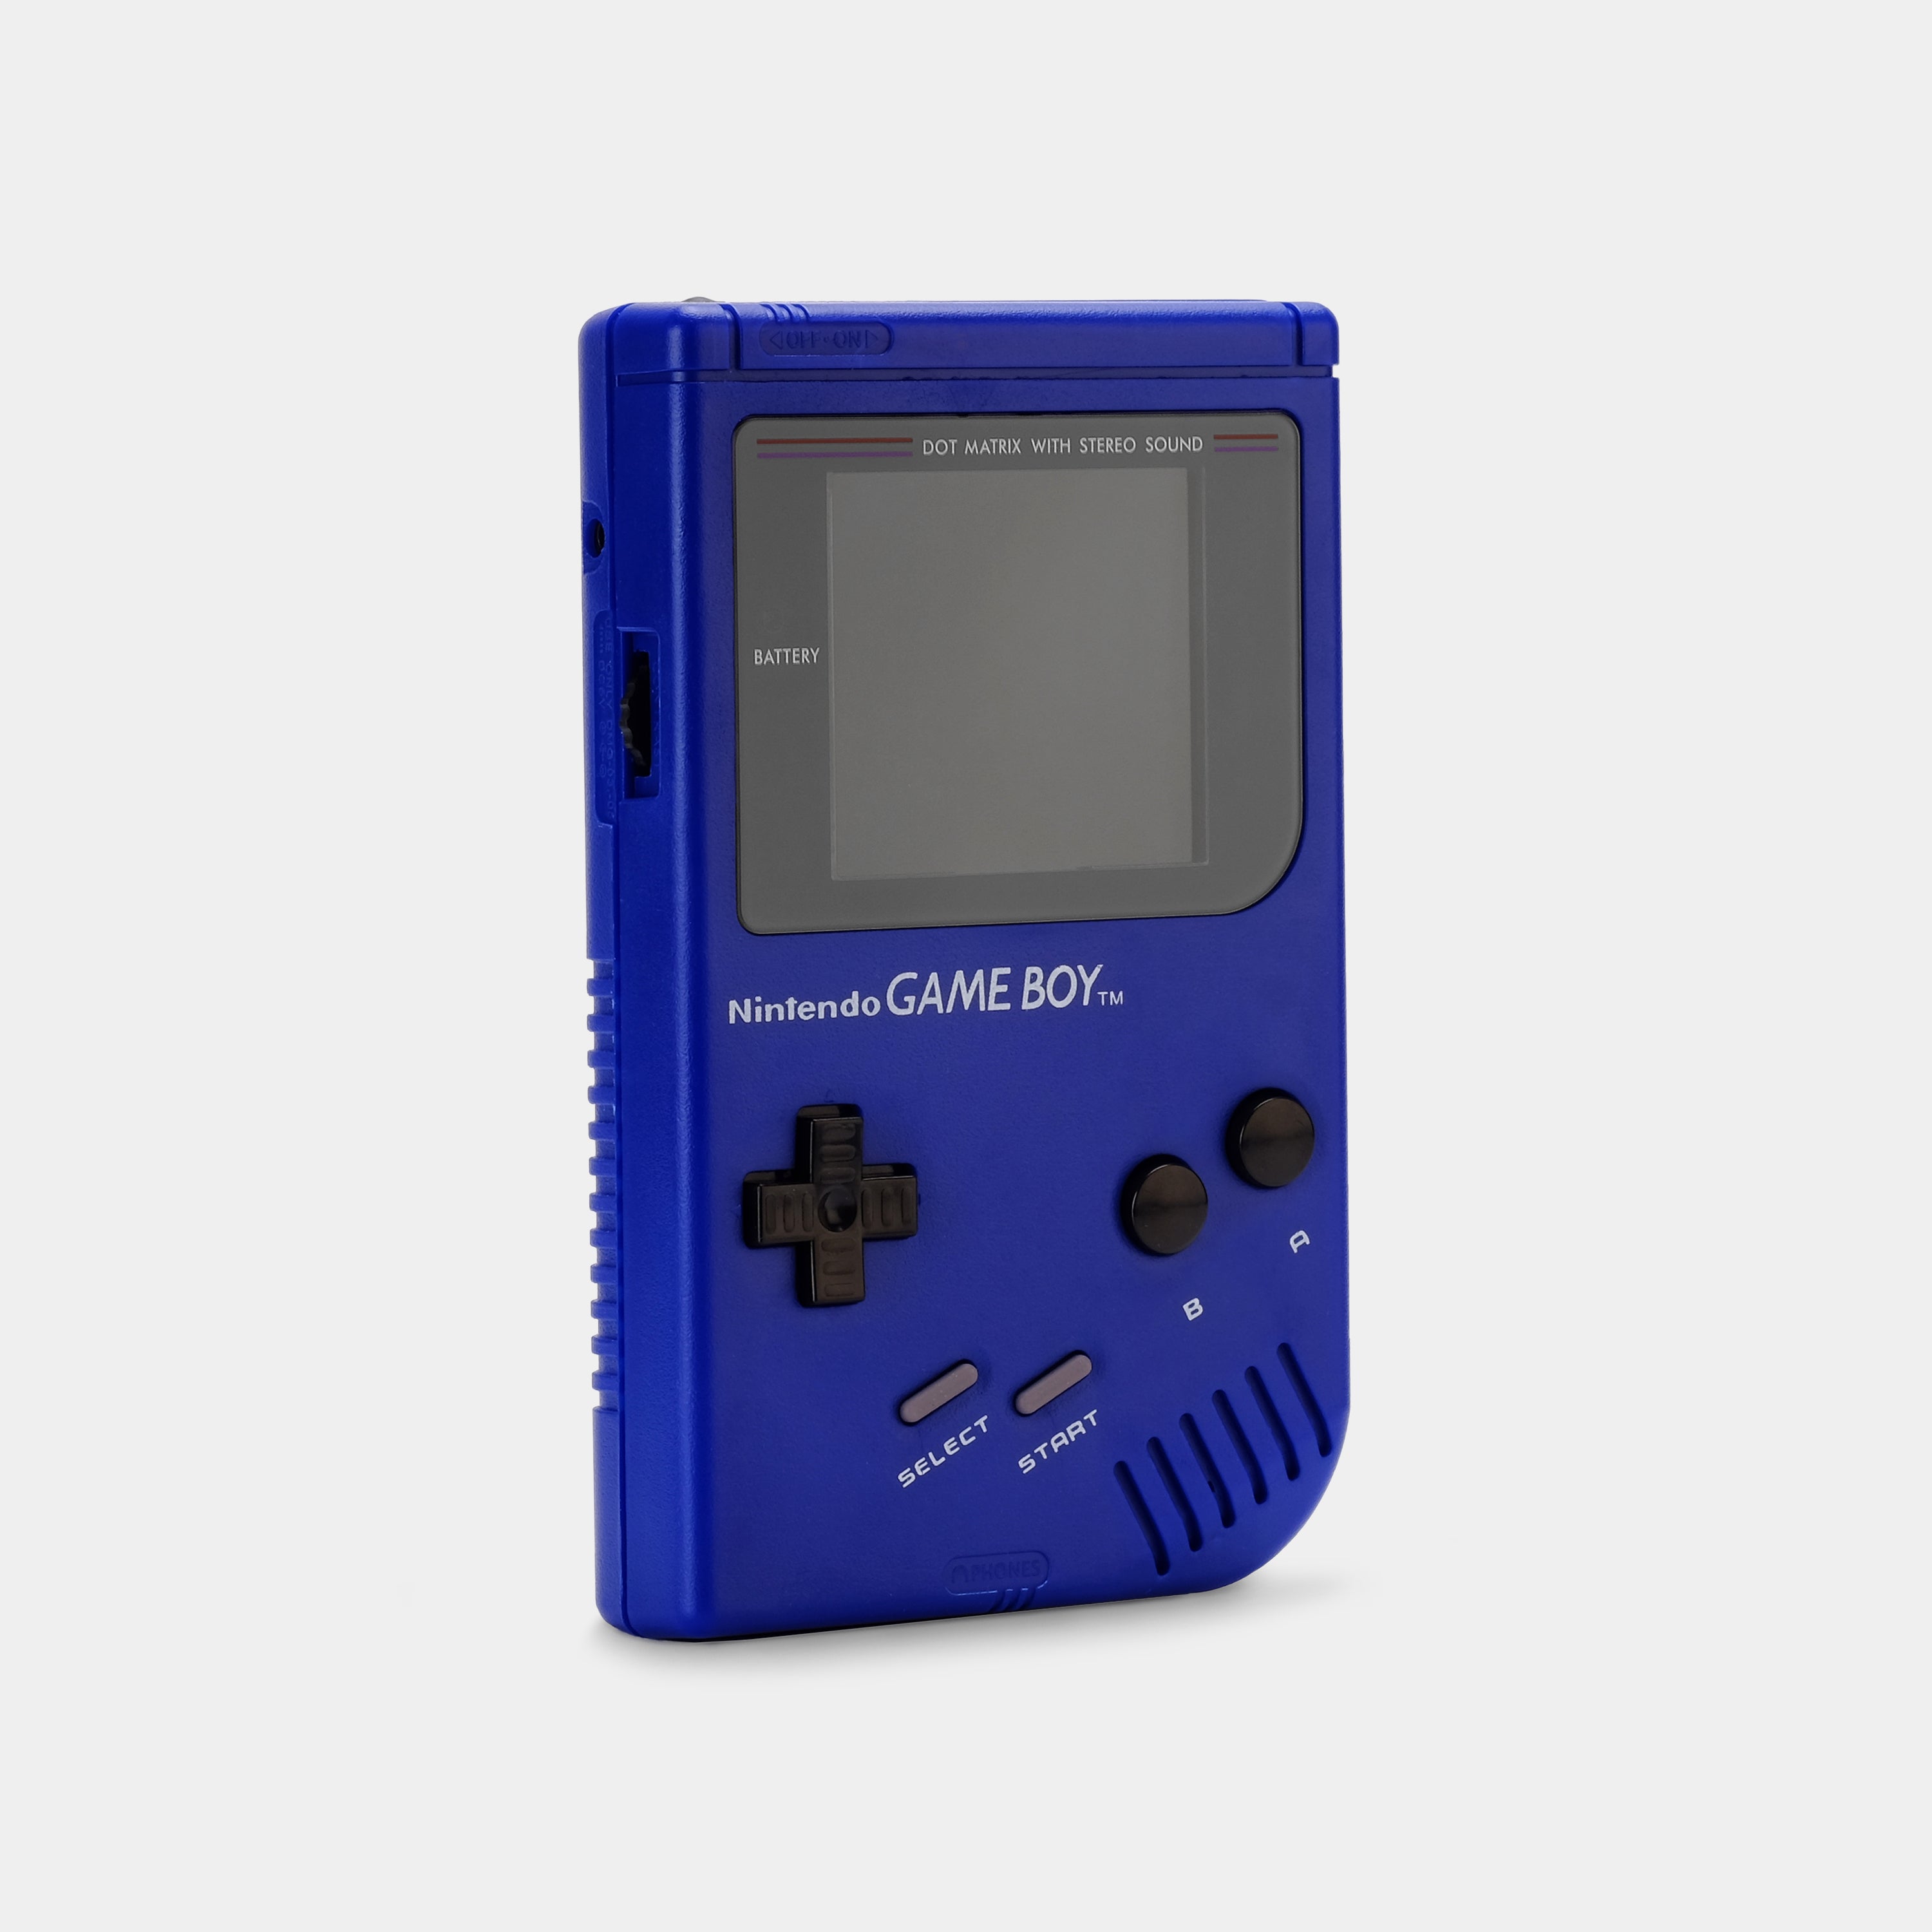 A timeline of Game Boy's record-breaking history as iconic console